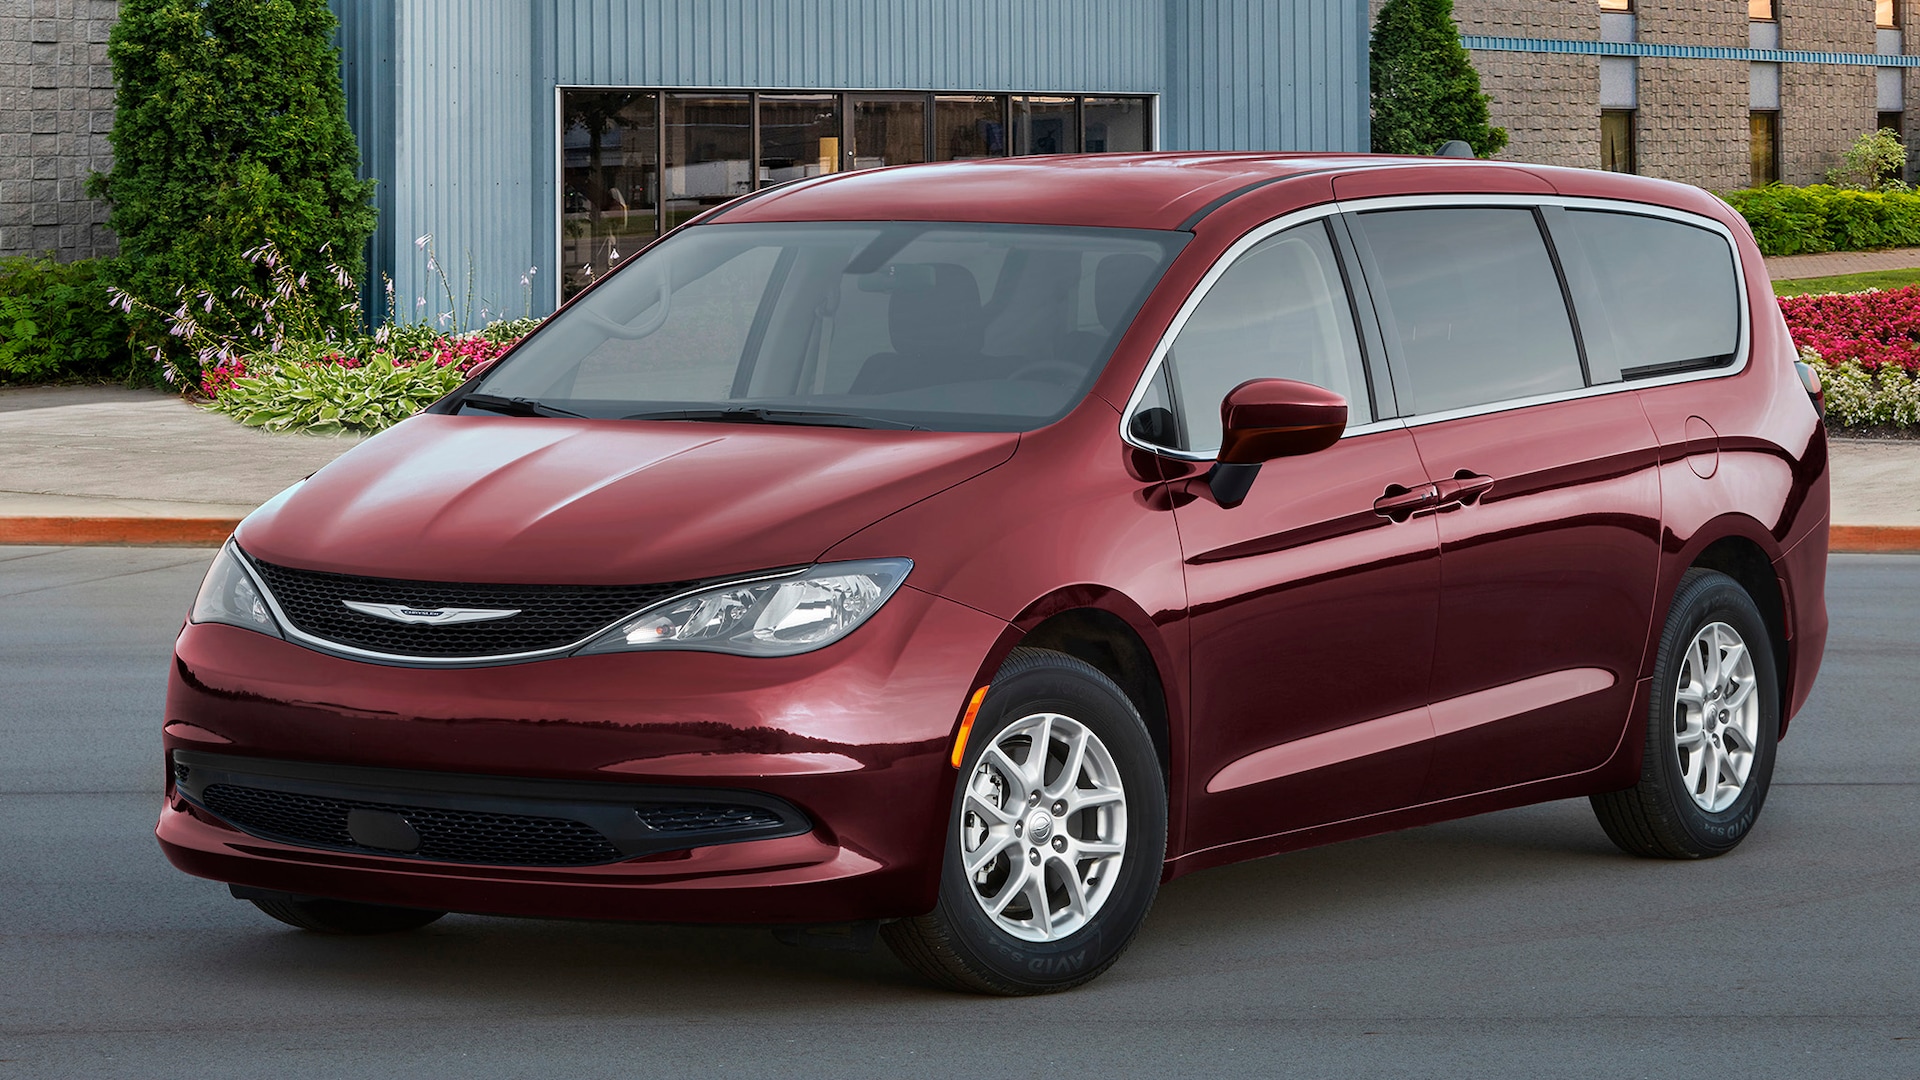 2022 Chrysler Voyager Prices, Reviews, and Photos - MotorTrend